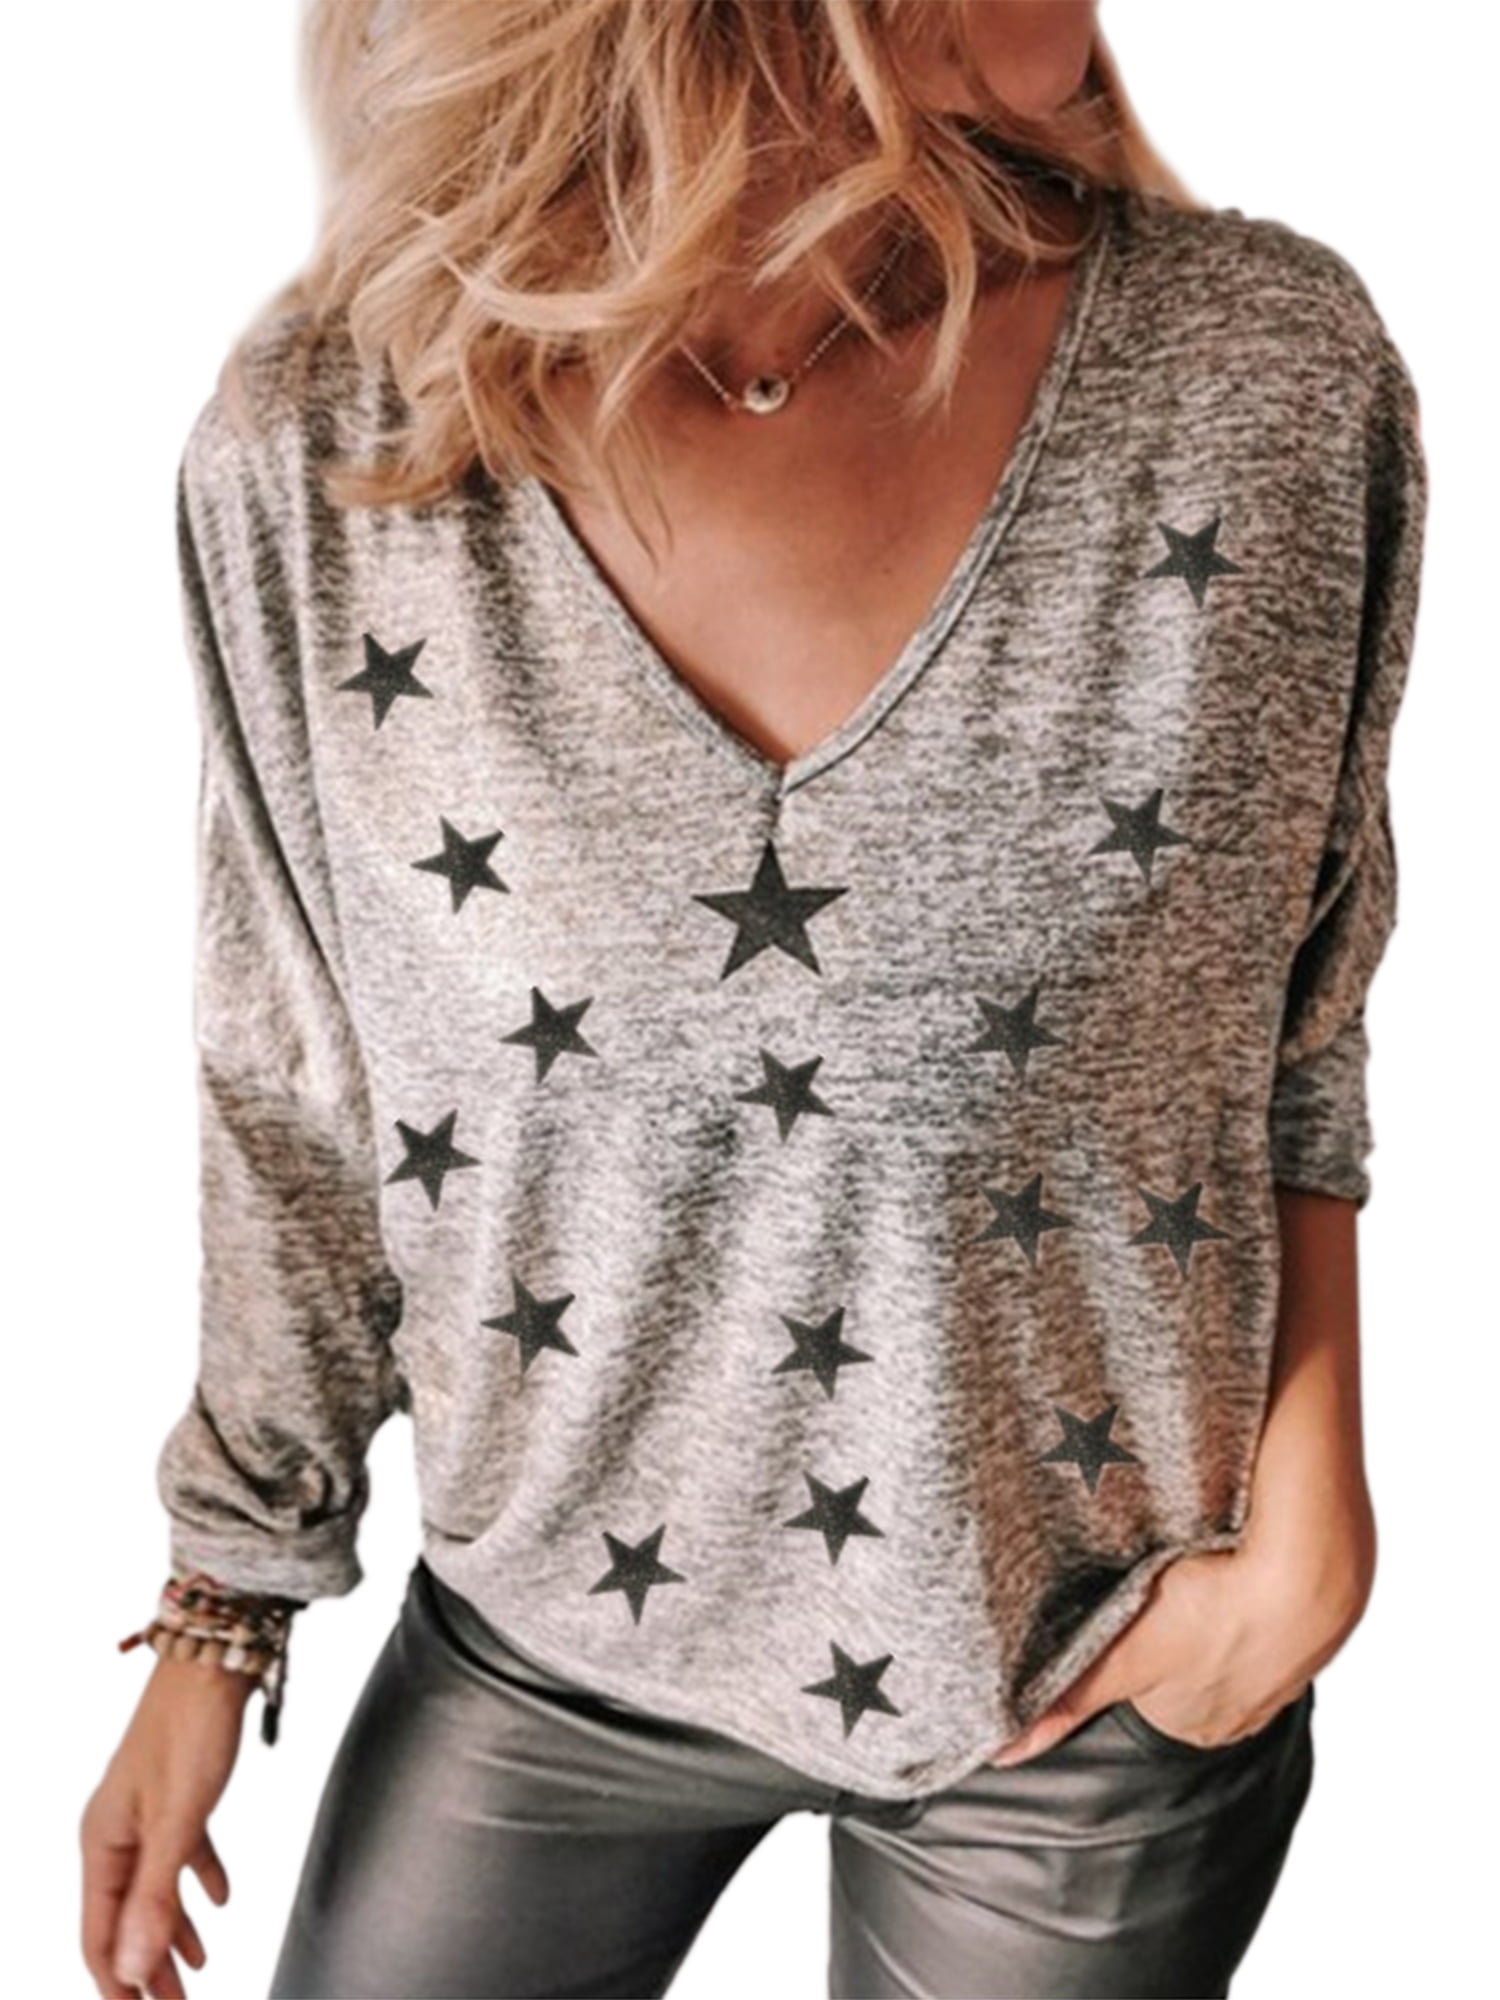 Star Womens Casual Long Sleeve Loose Fit T-Shirts Printed Pullovers Sweatshirts Tunics Blouse Tops